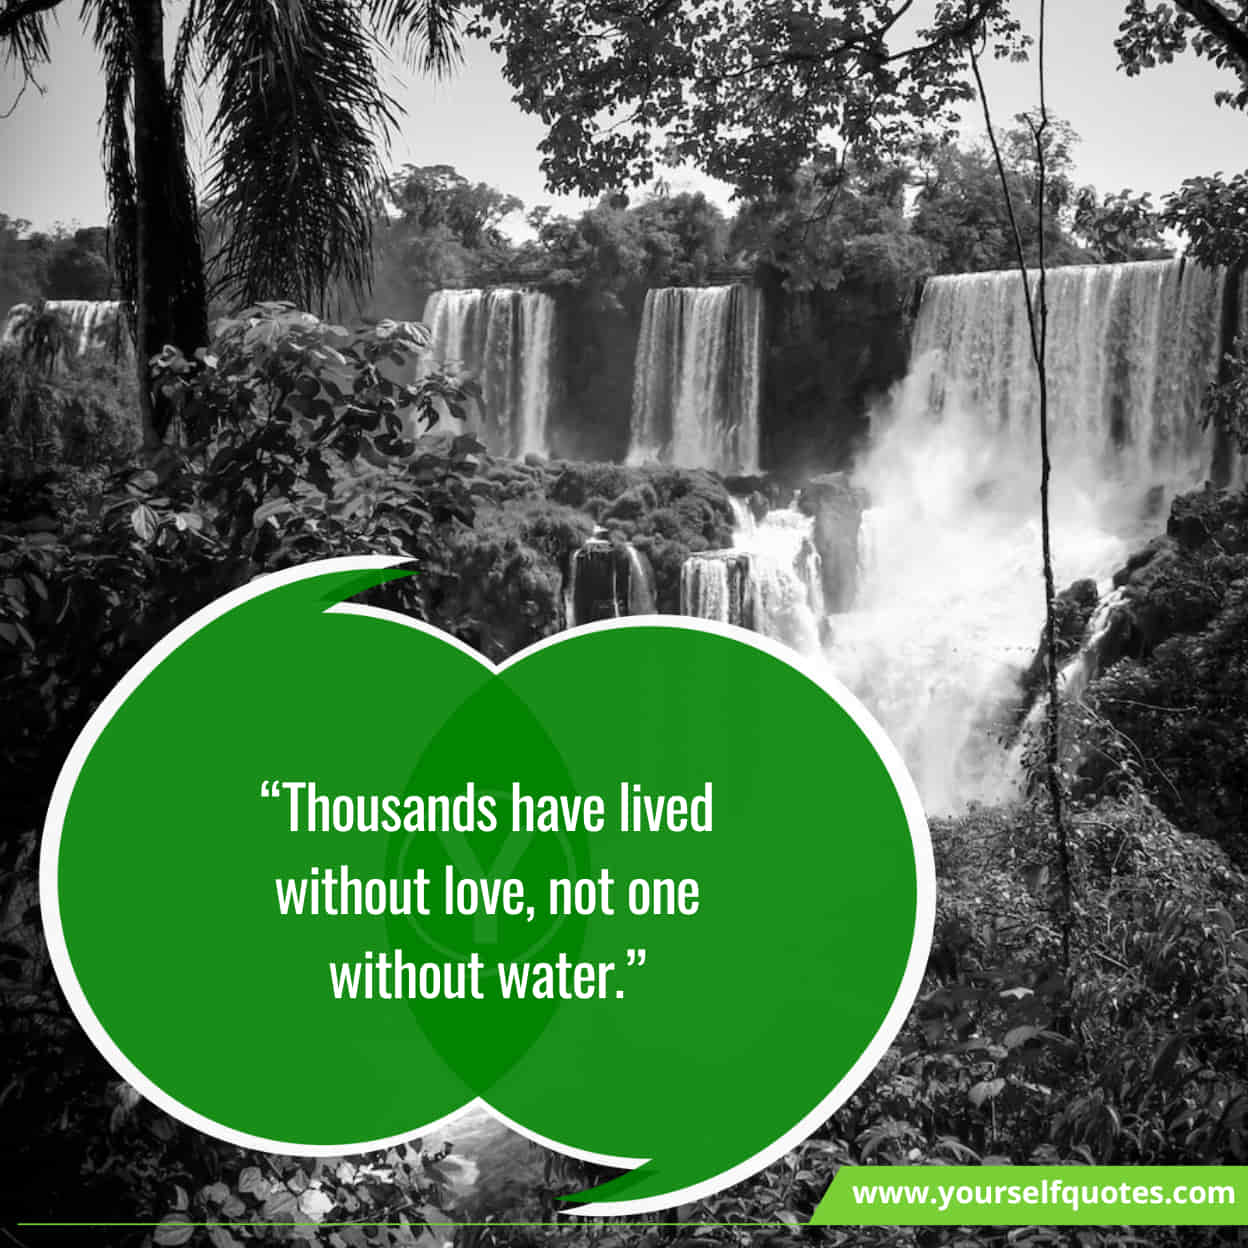 Inspirational Quotes For Water